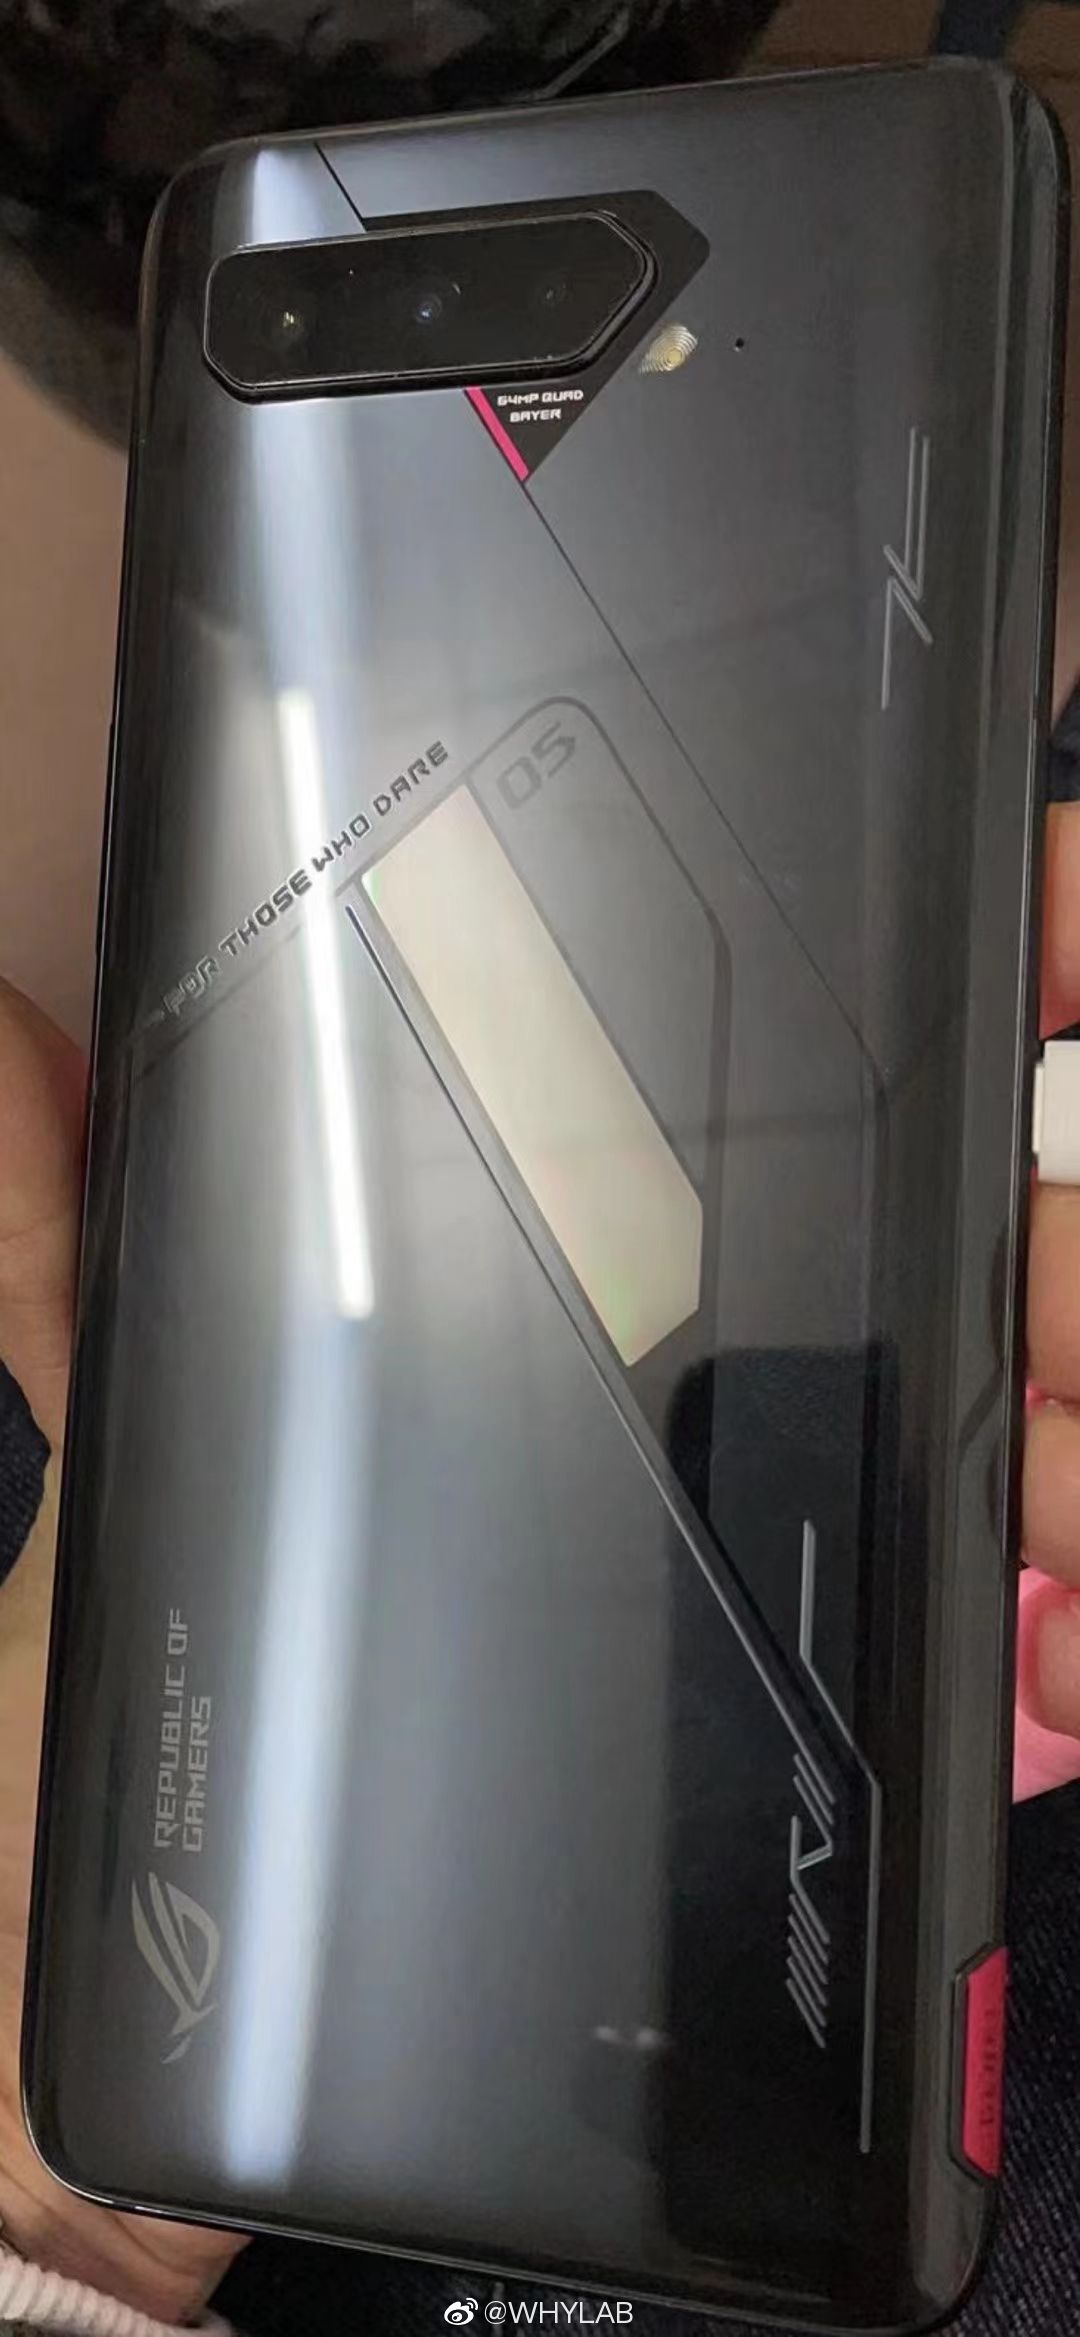 Live Shot of the next-gen ASUS ROG Phone Appears online; Official Moniker still yet to be confirmed